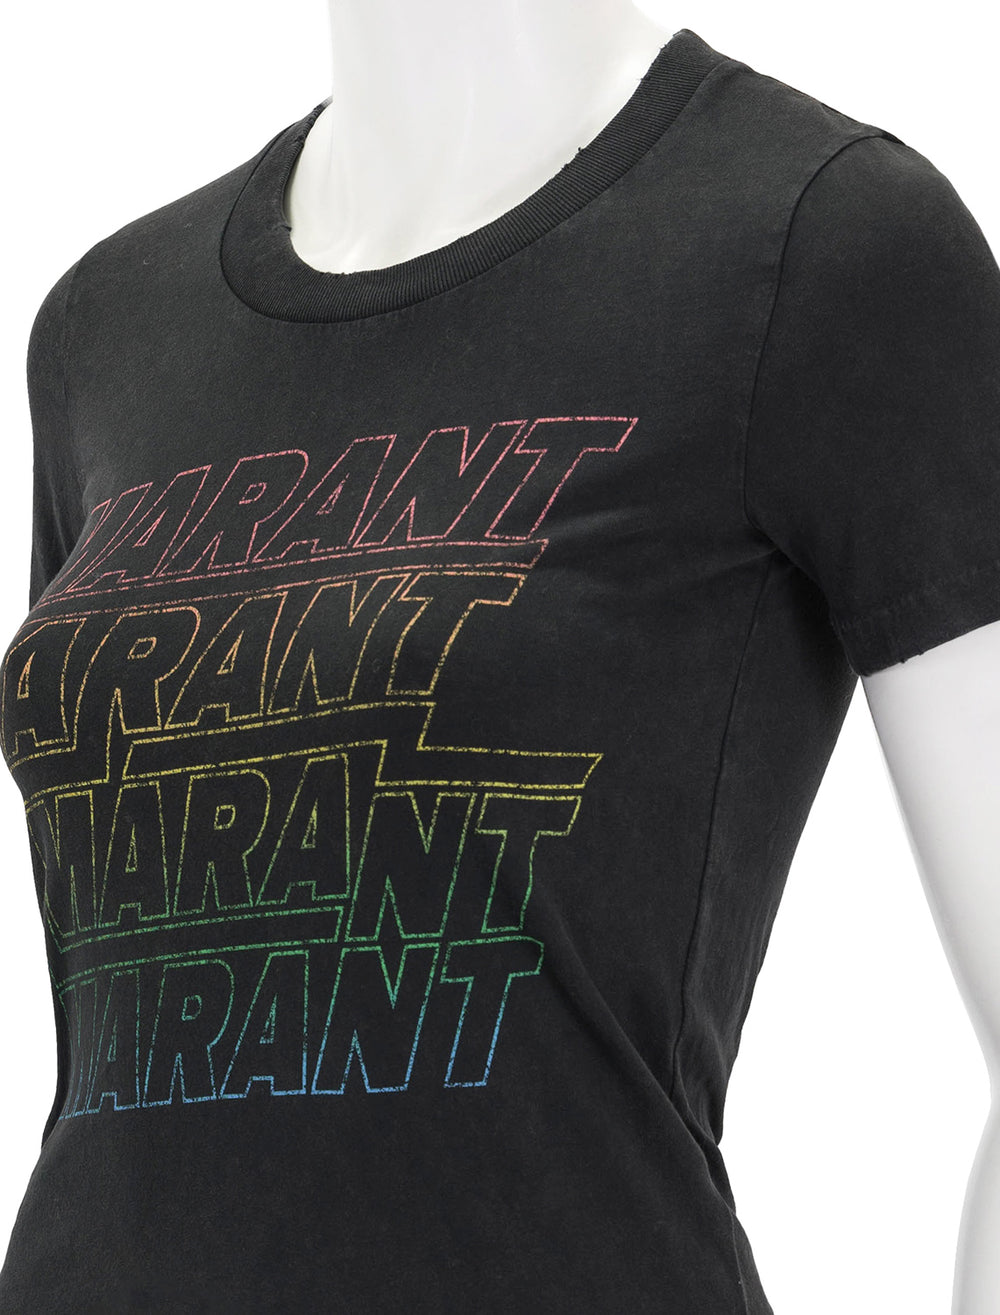 Close-up view of Isabel Marant Etoile's ziliani tee in faded black.